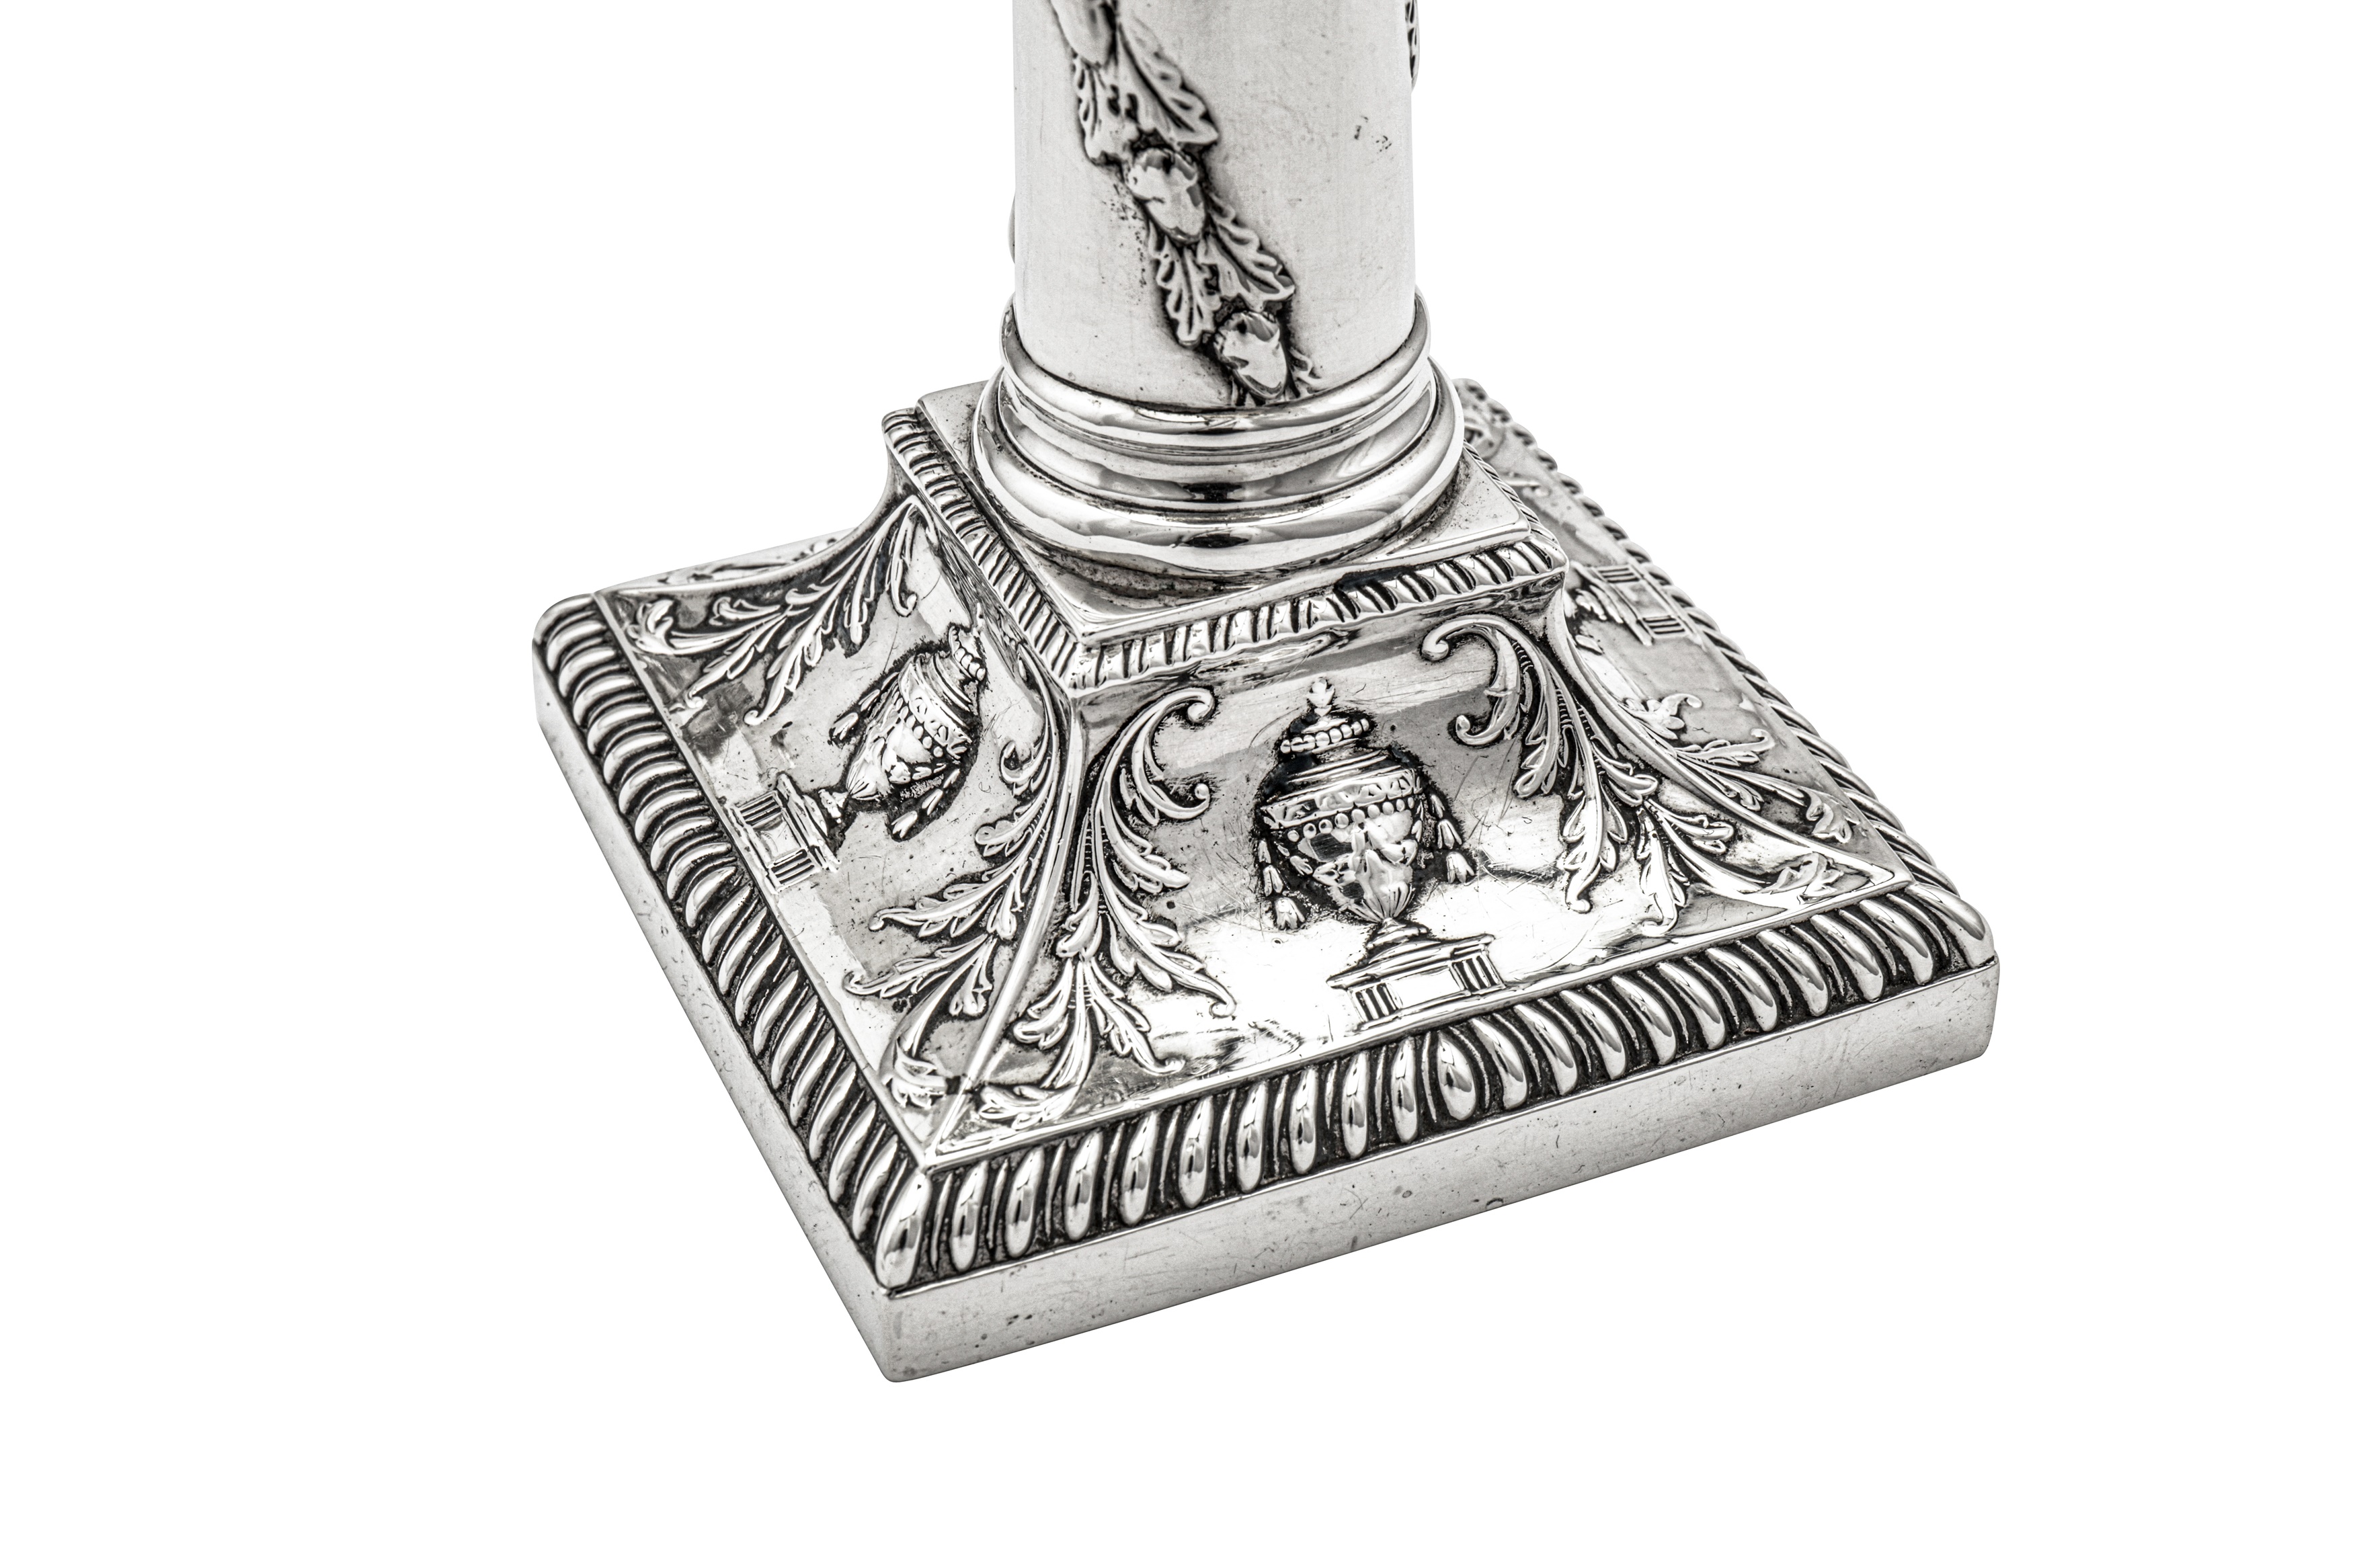 A pair of Victorian sterling silver candlesticks, London 1899 by Thomas Bradbury and Sons - Image 2 of 7